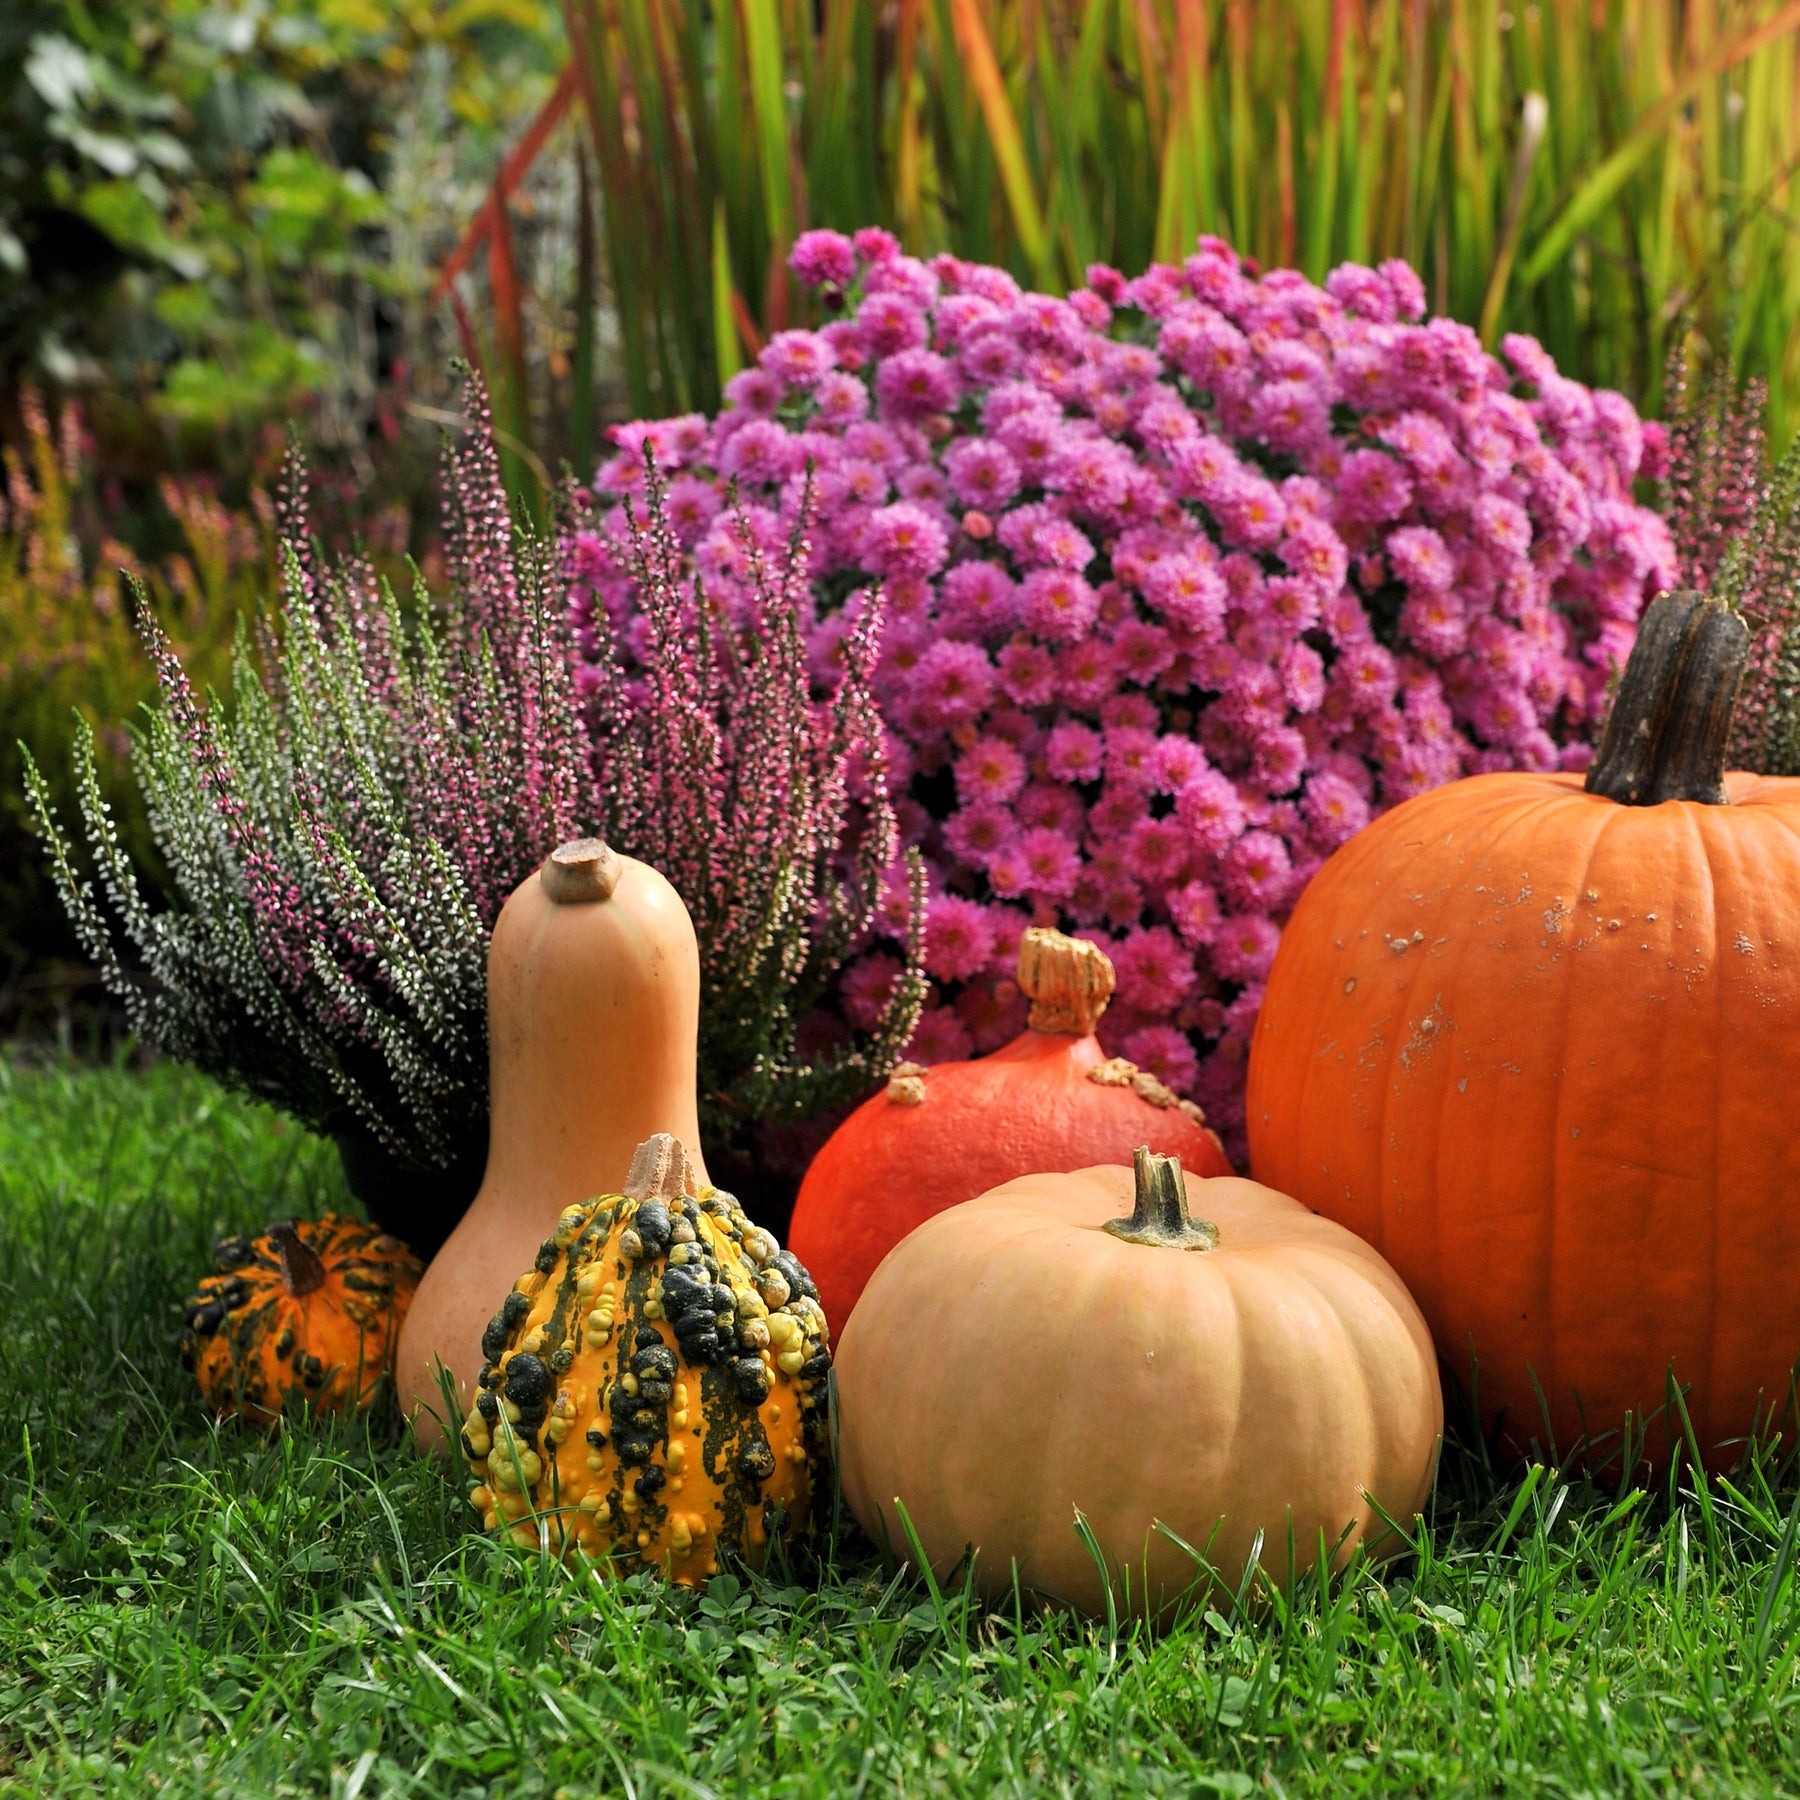 Fall Garden with Mums, Pumpkins and Lawn